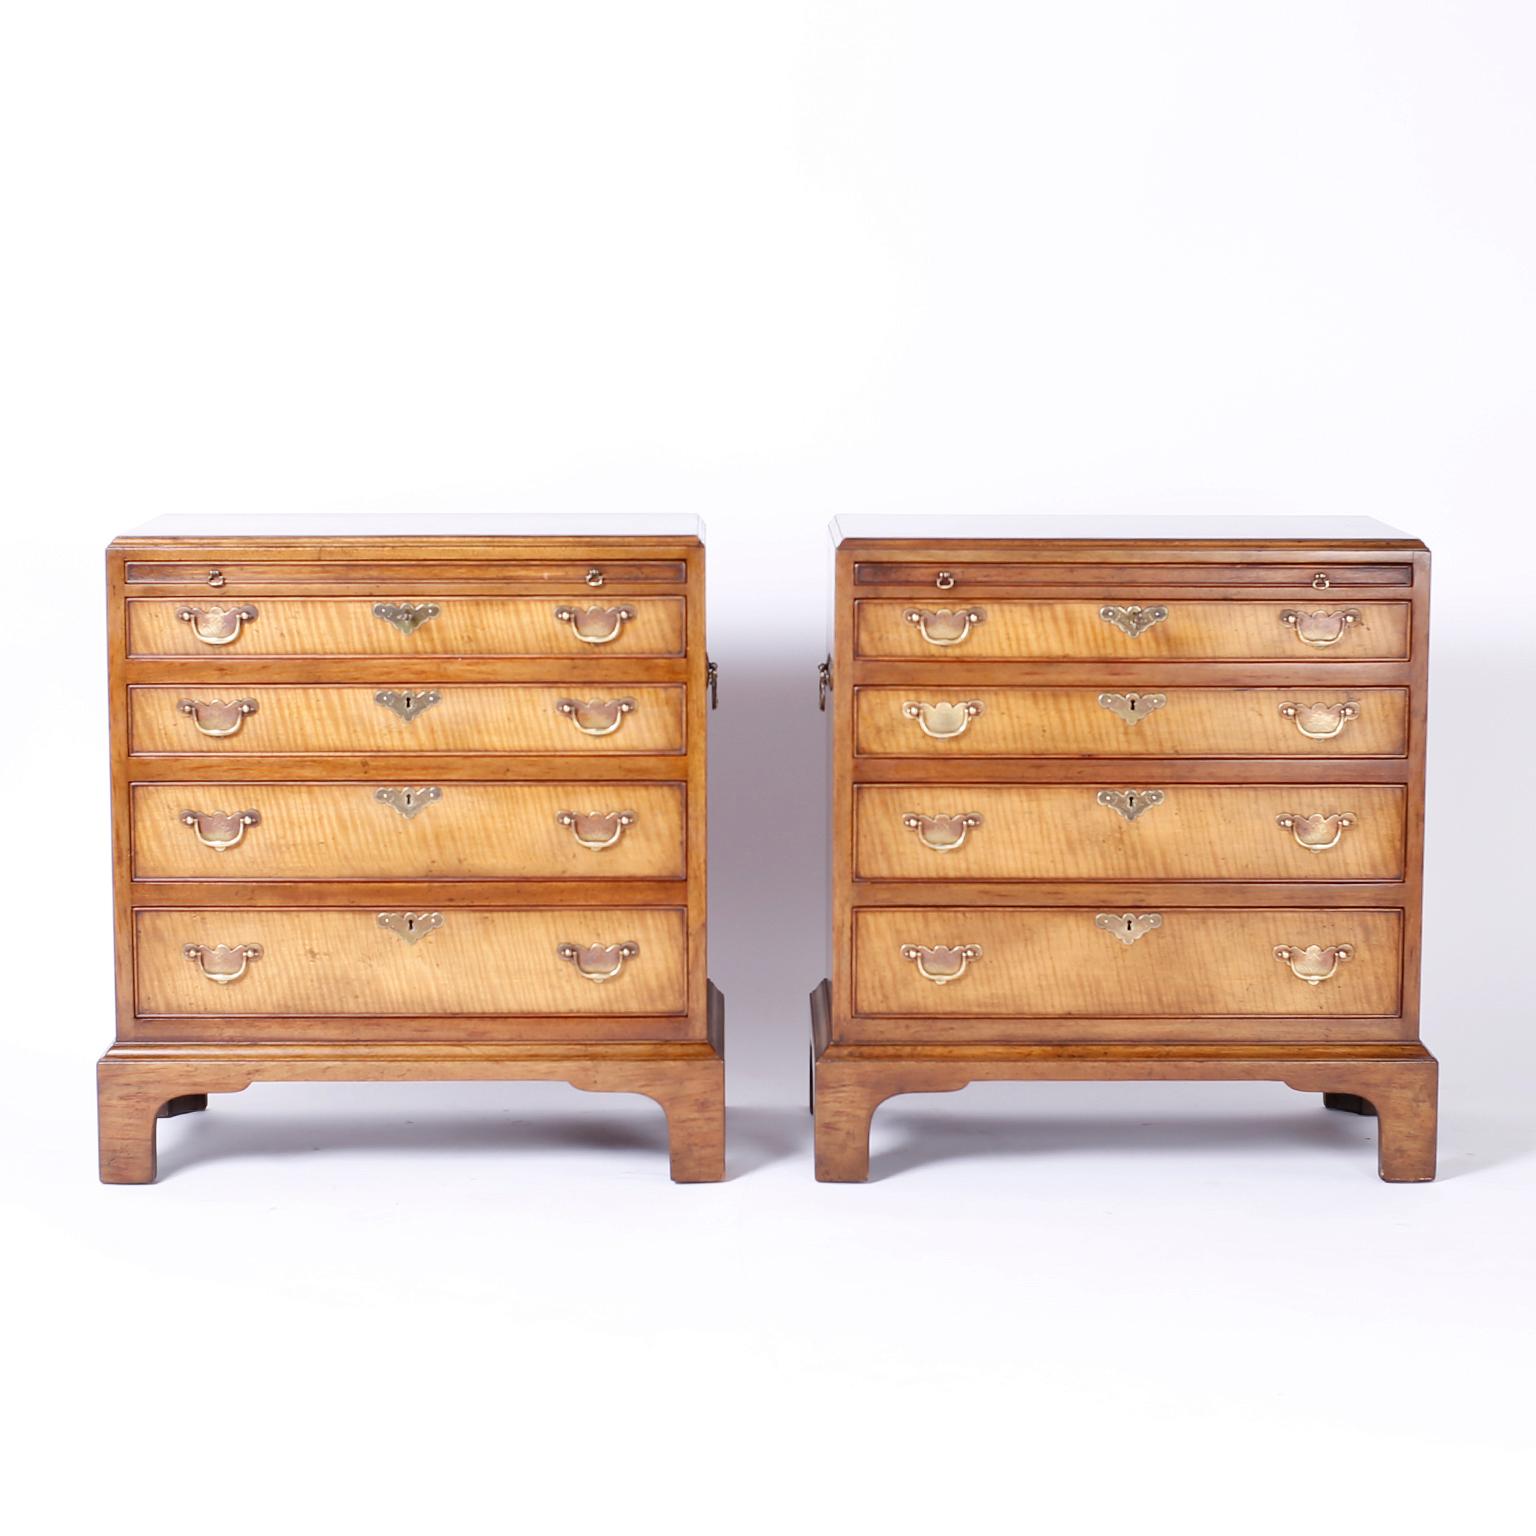 Pair of four drawer nightstands crafted in fruitwood with exotic cross cuts on the drawer fronts and featuring tooled leather slide out trays, floral engraved brass hardware, and classic bracket feet. Signed Beacon Hill in a Drawer.